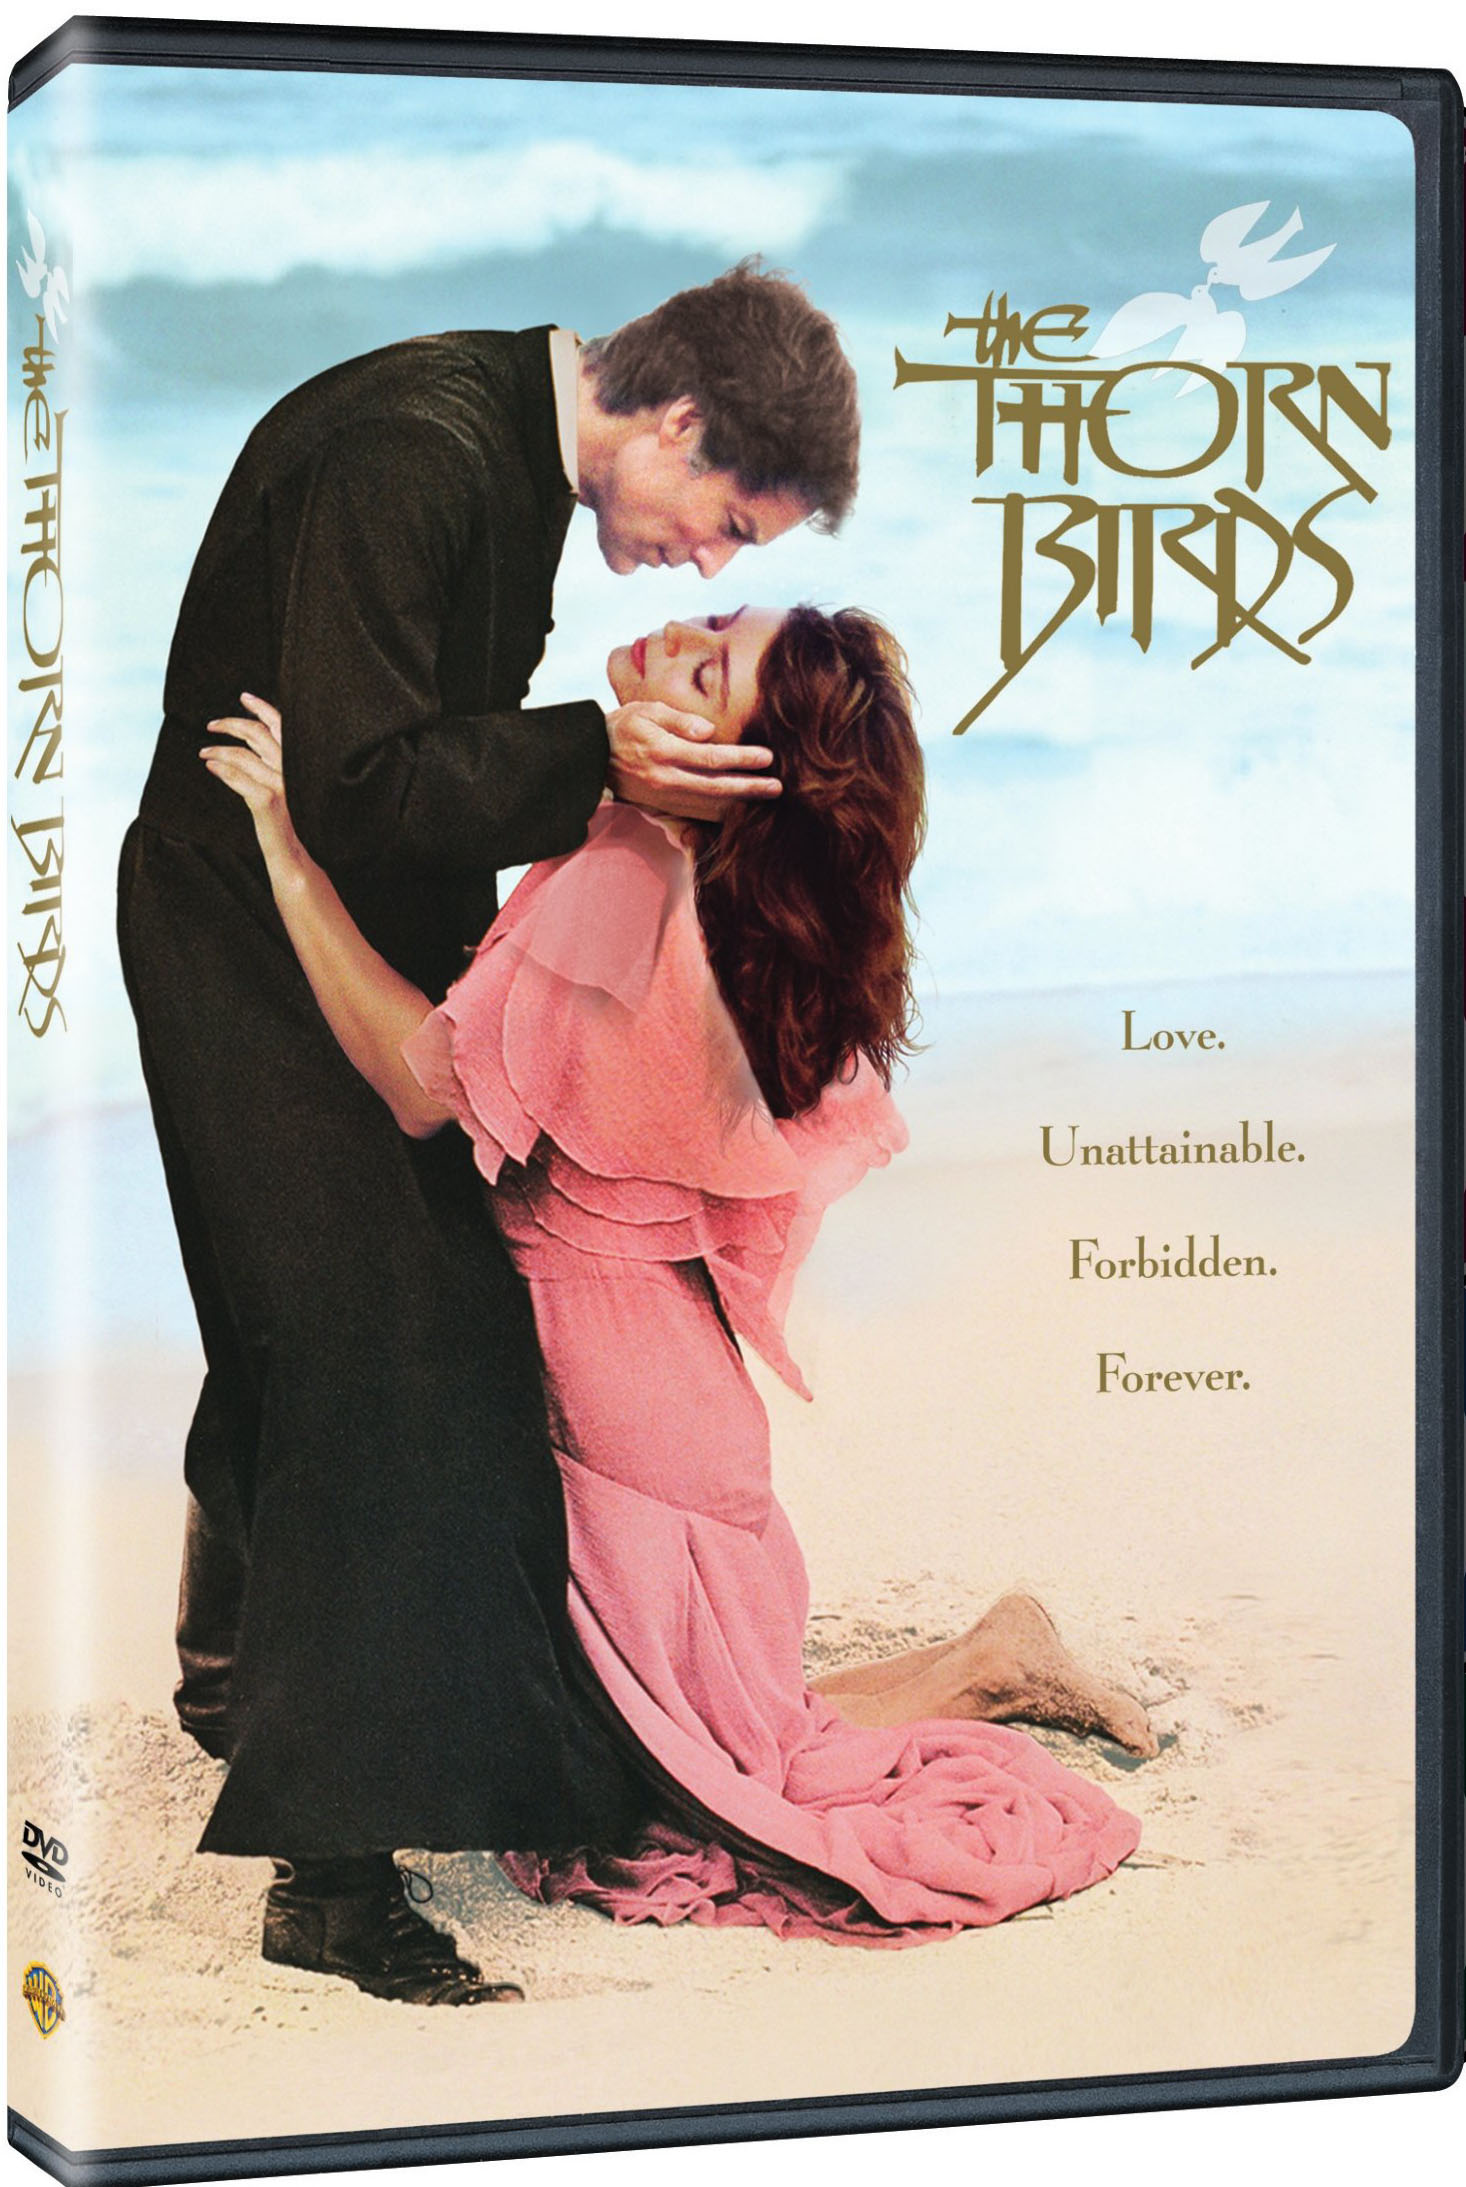 The Thorn Birds (DVD) - image 2 of 2